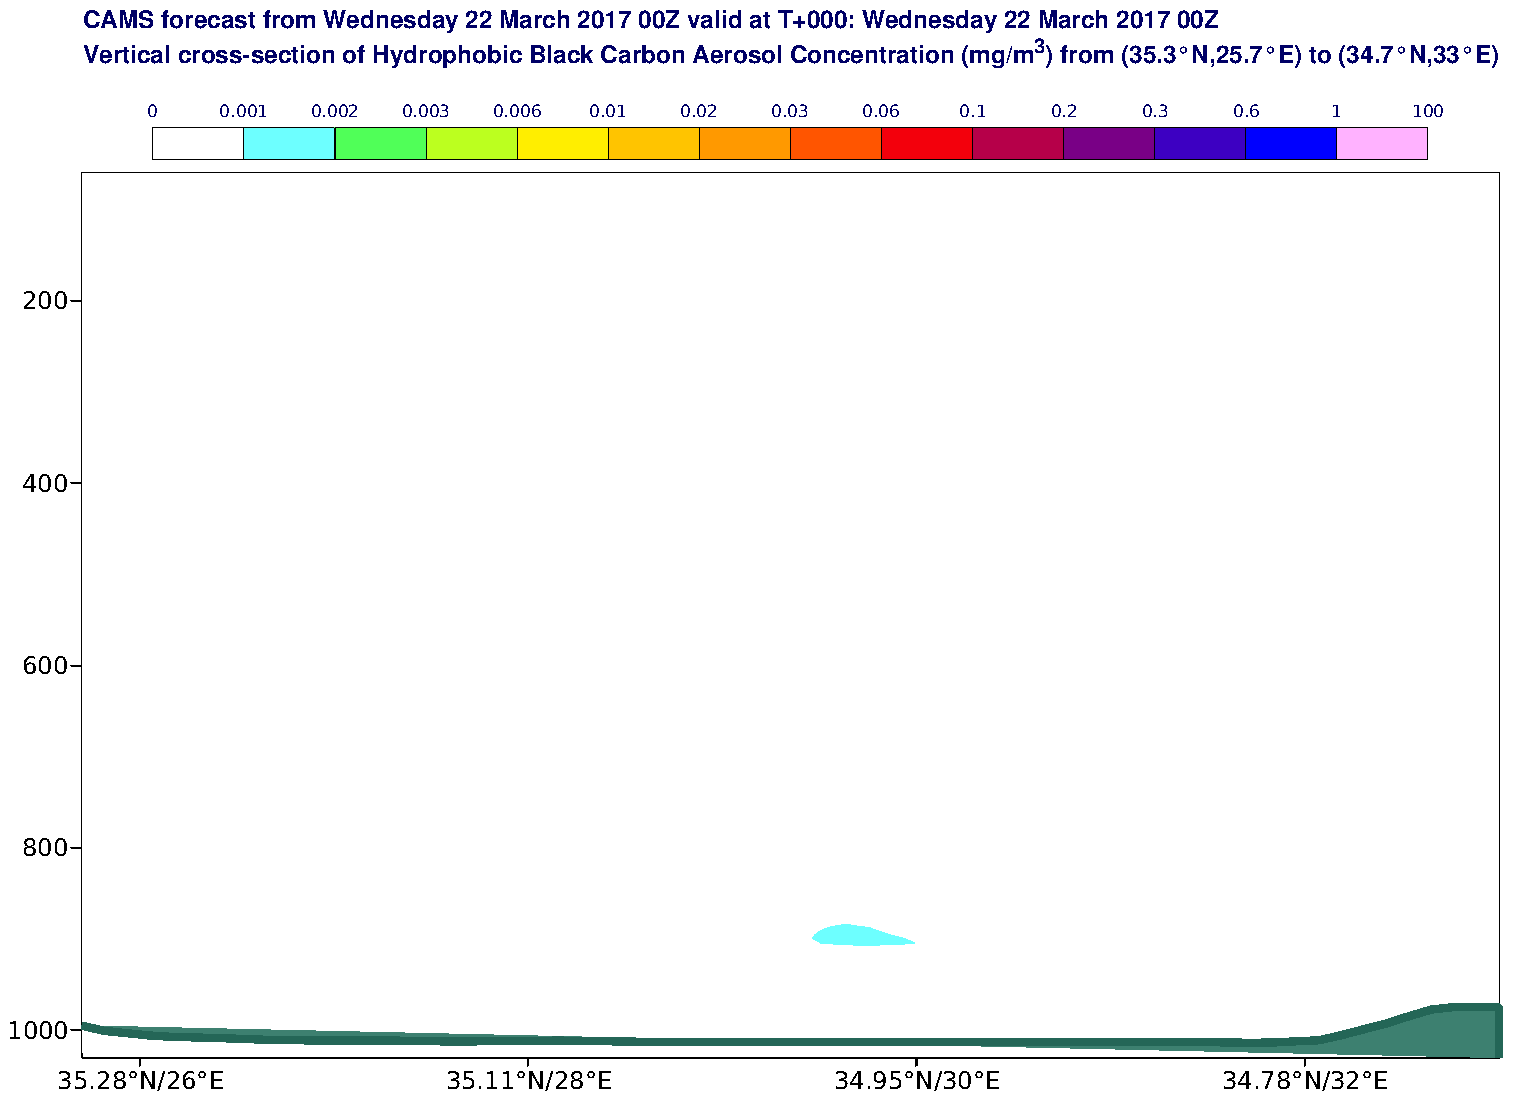 Vertical cross-section of Hydrophobic Black Carbon Aerosol Concentration (mg/m3) valid at T0 - 2017-03-22 00:00